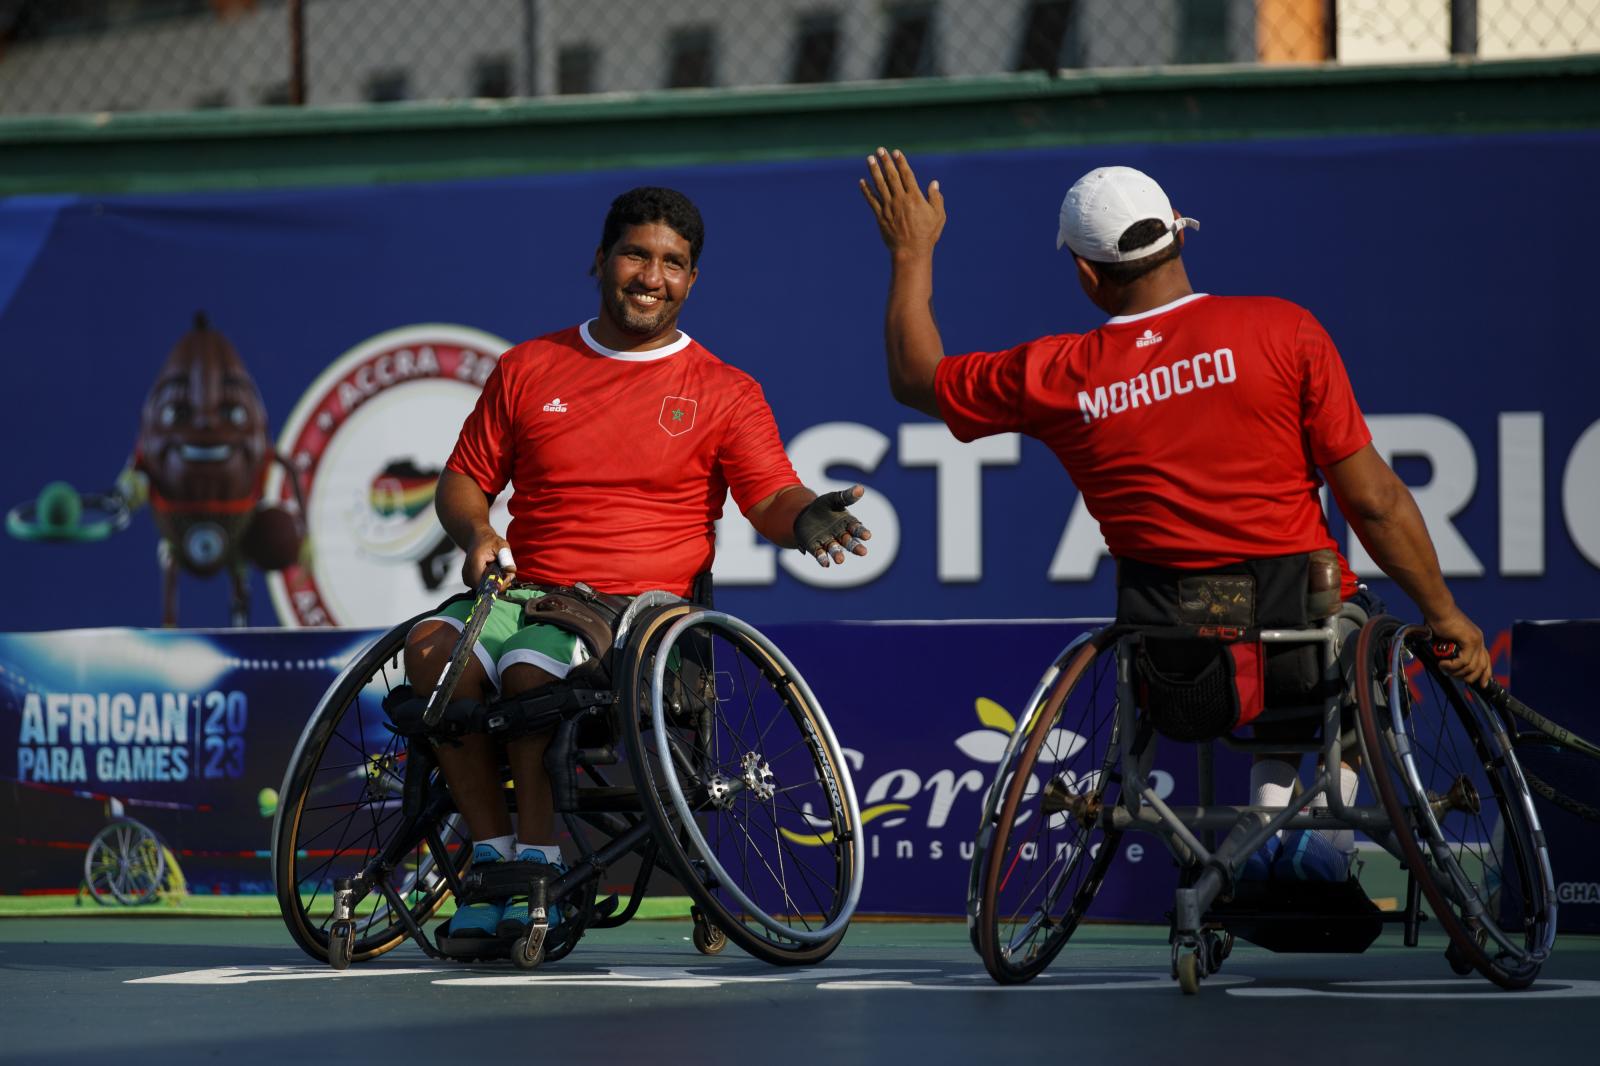 Image from First African Para Games  - Morocco’s wheelchair-long tennis players react...